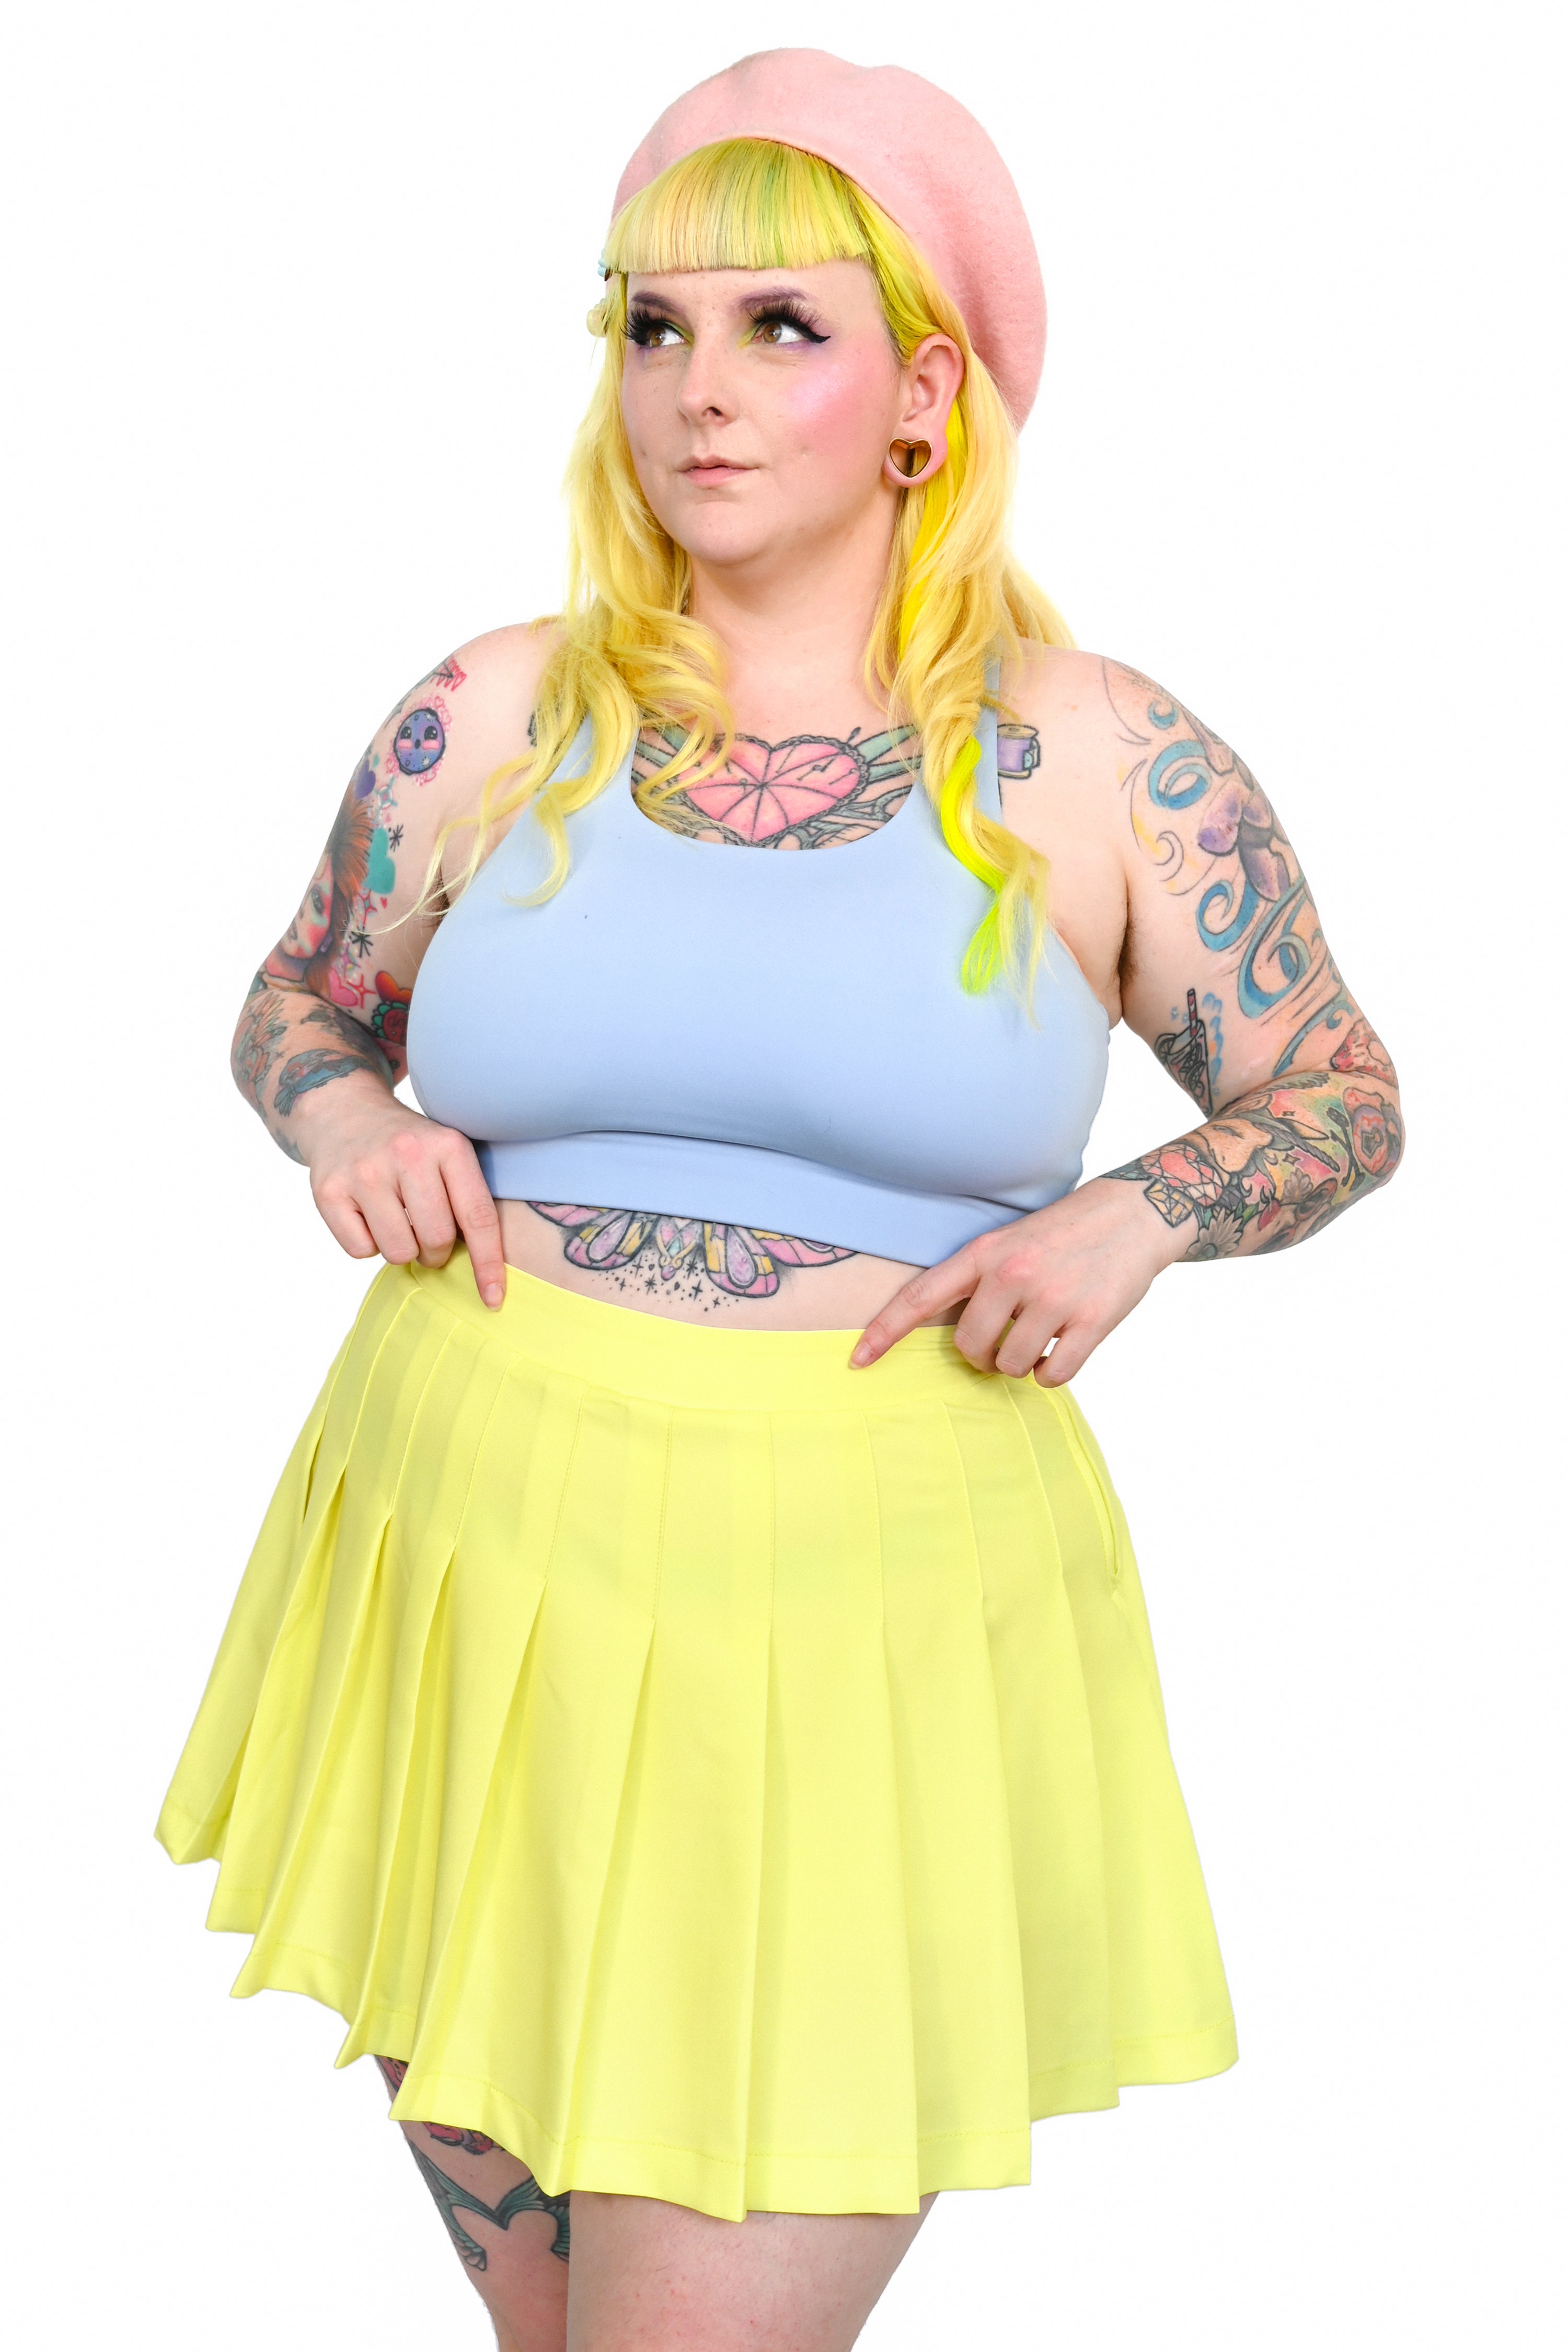 Bright yellow pleated skirt with side zipper and built in safety shorts